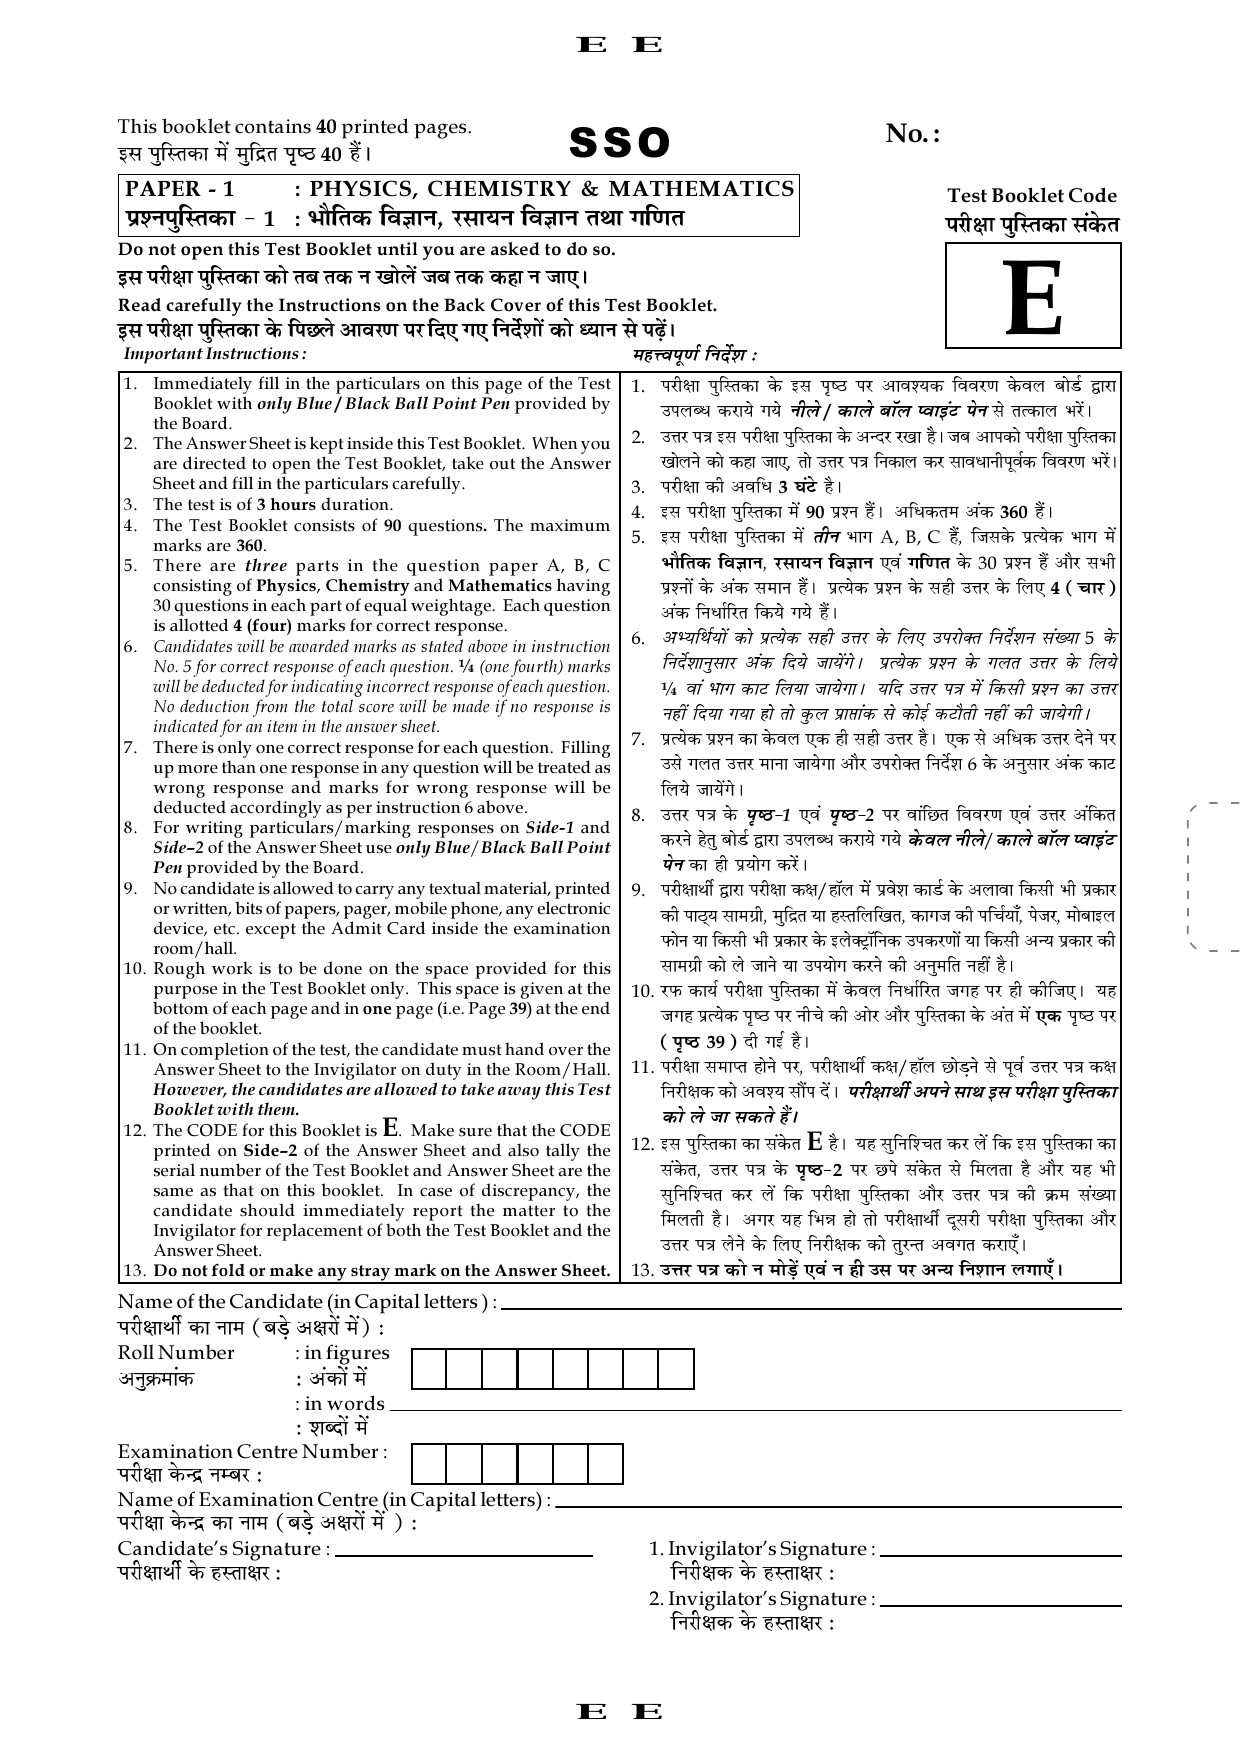 JEE Main Exam Question Paper 2016 Booklet E 1